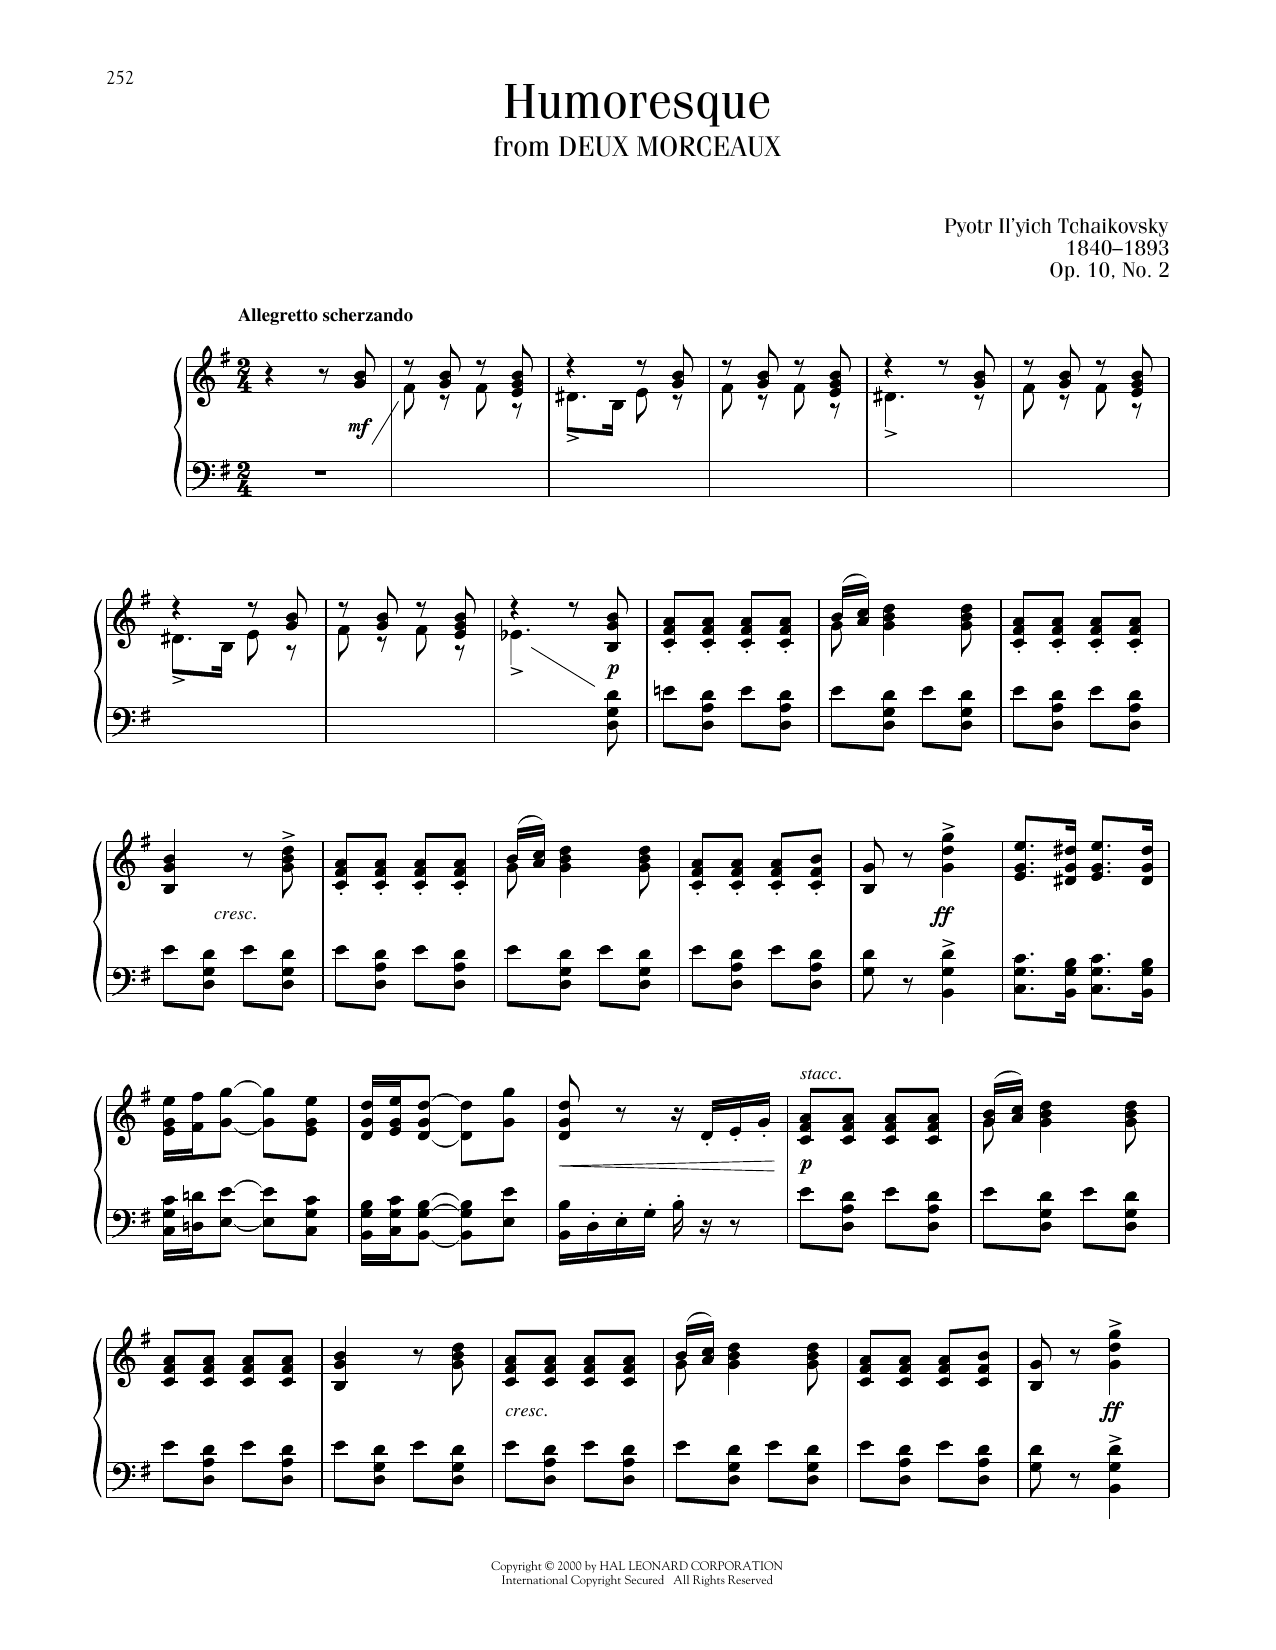 Pyotr Il'yich Tchaikovsky Humoresque, Op. 10, No. 2 sheet music notes printable PDF score